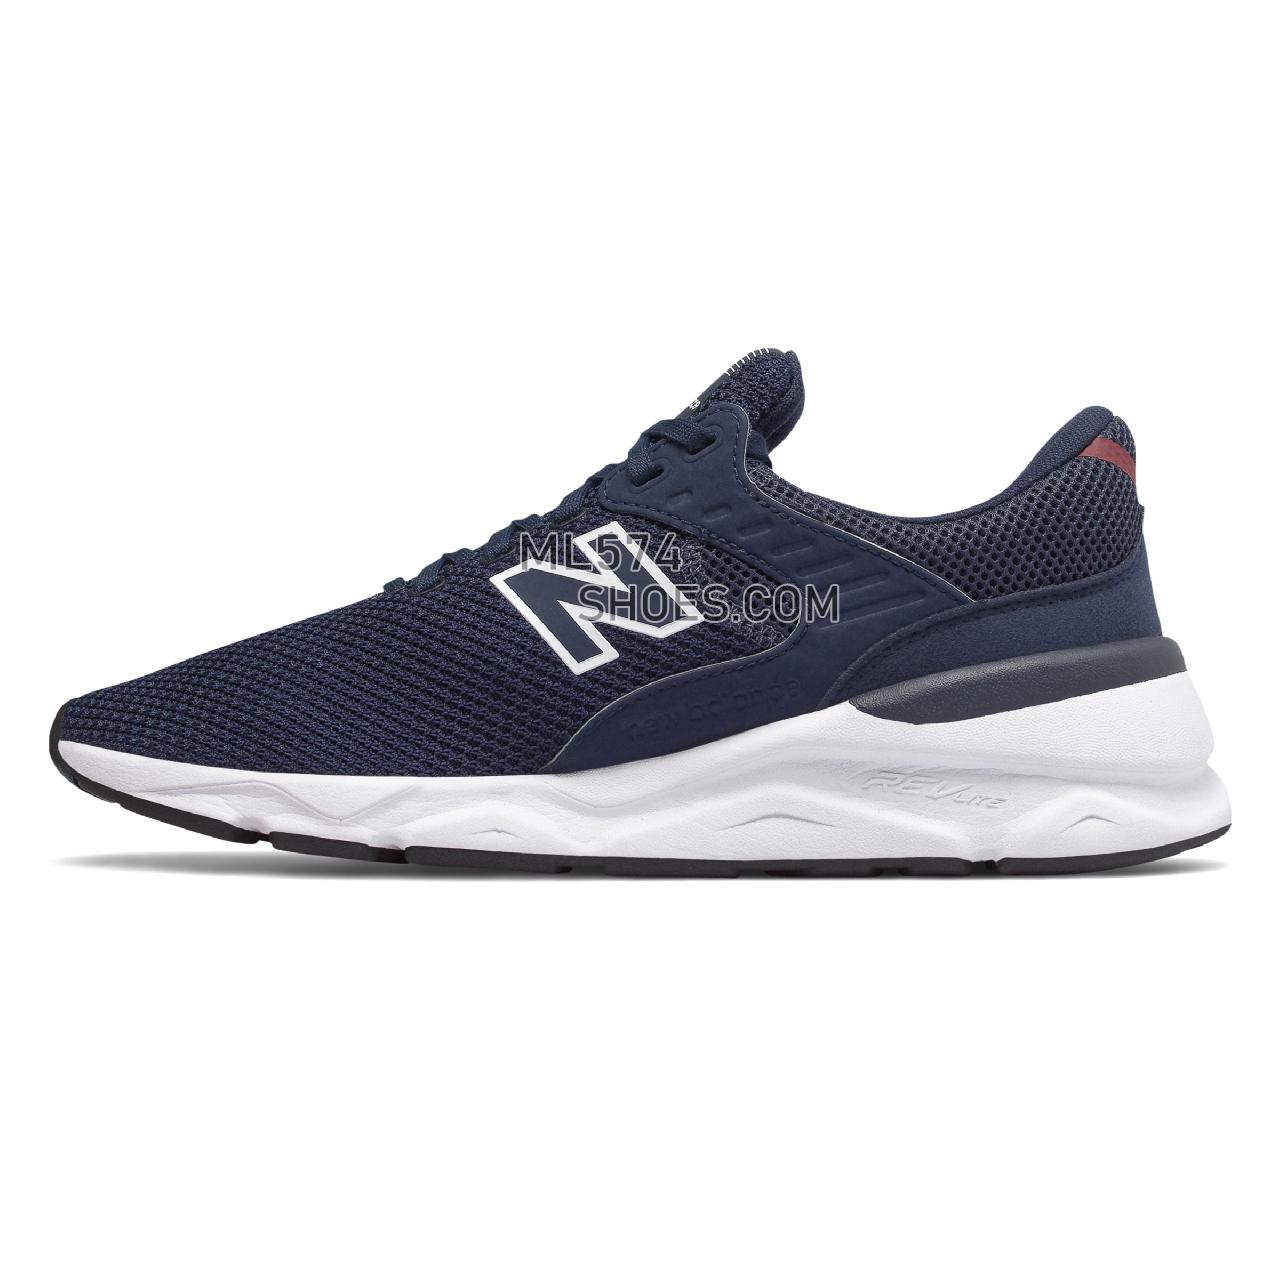 New Balance X-90 - Men's 90 - Classic Pigment with Mercury Red - MSX90CRF